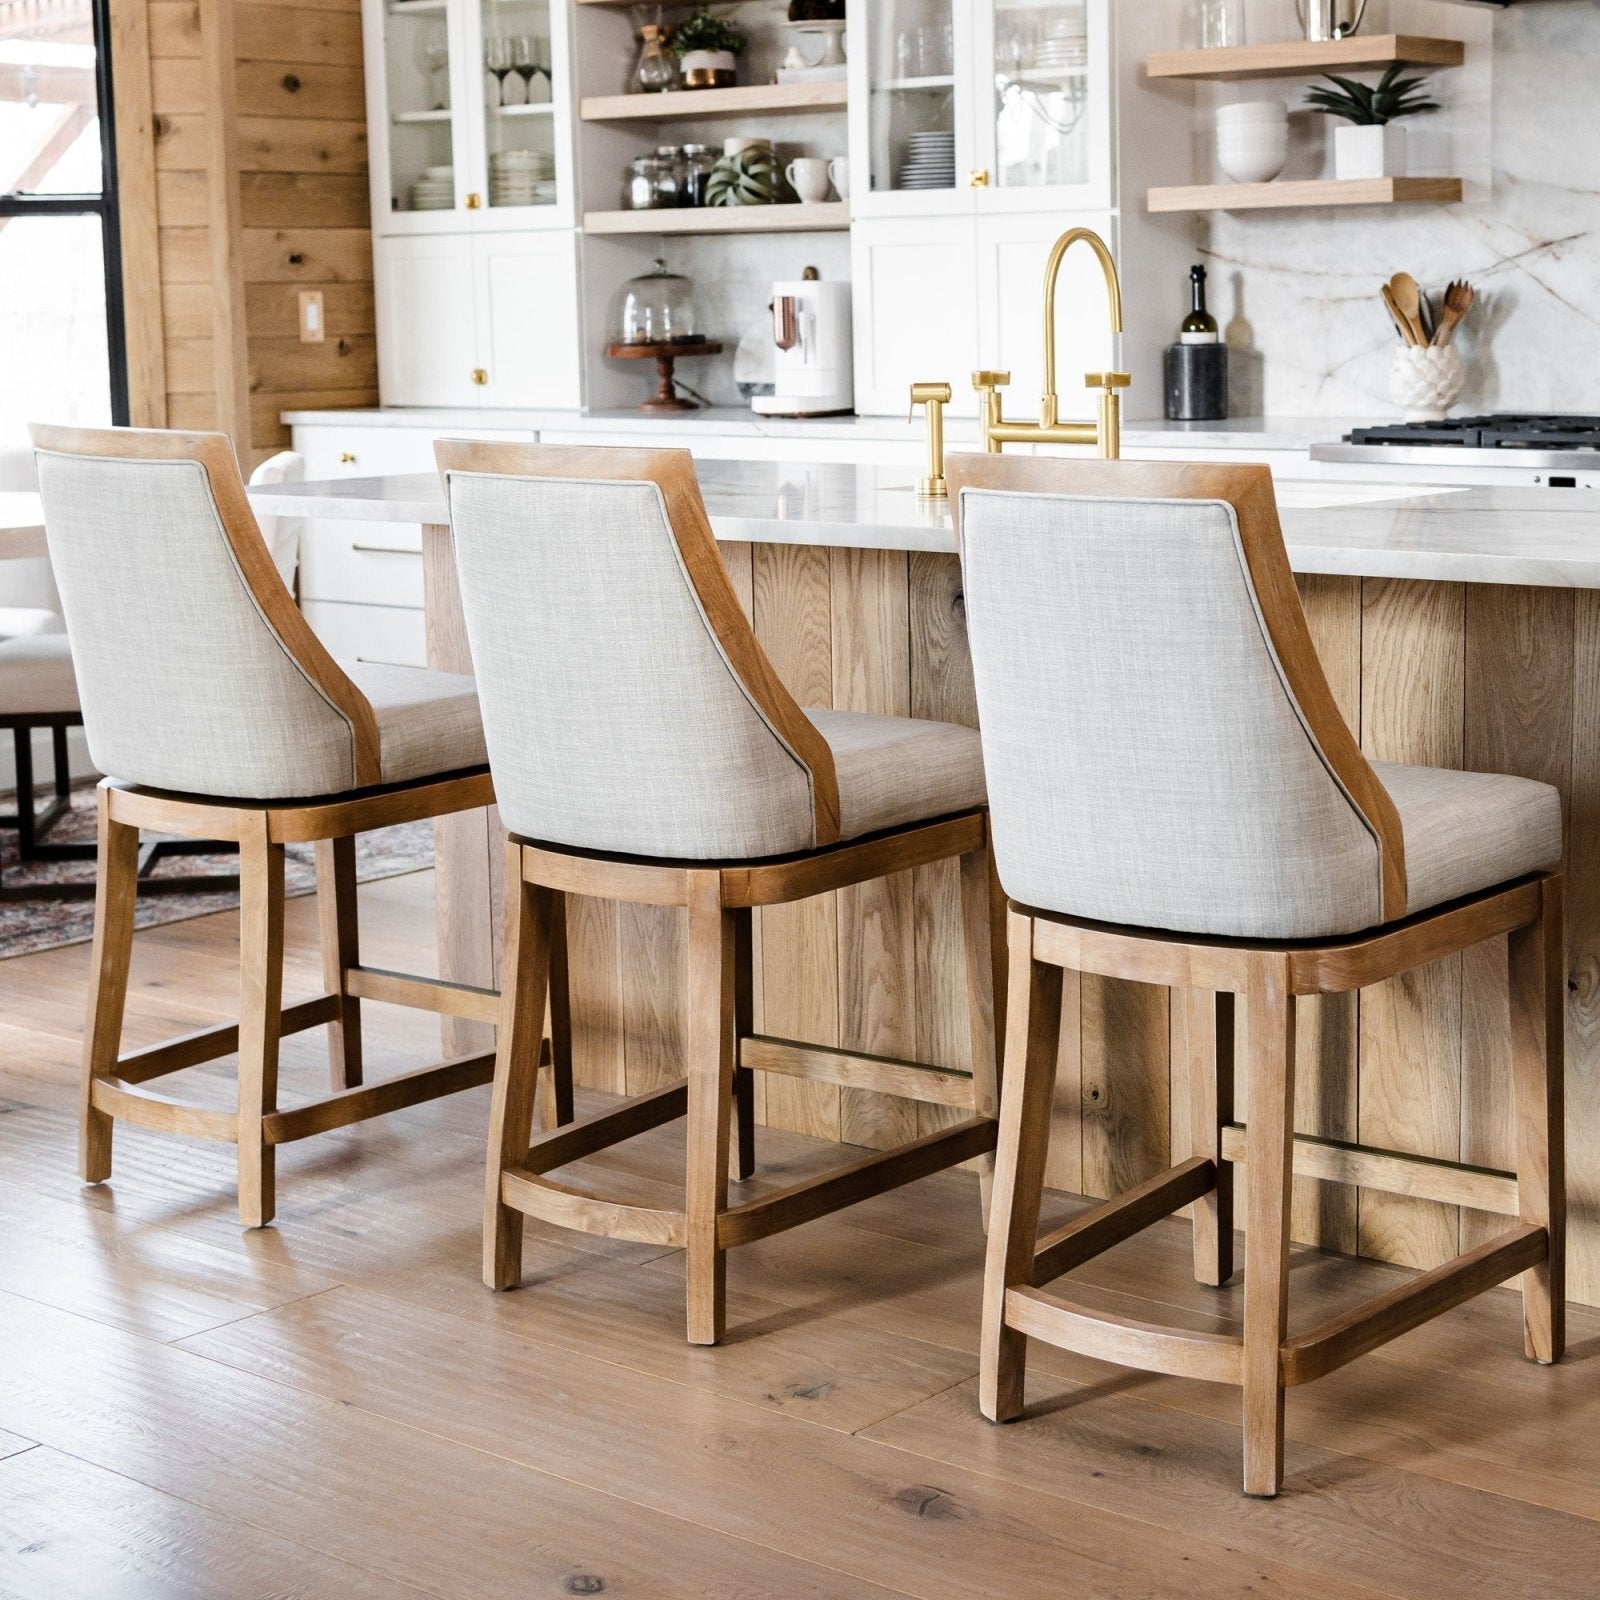 Vienna Counter Stool in Weathered Oak Finish with Sand Color Fabric Upholstery in Stools by Maven Lane